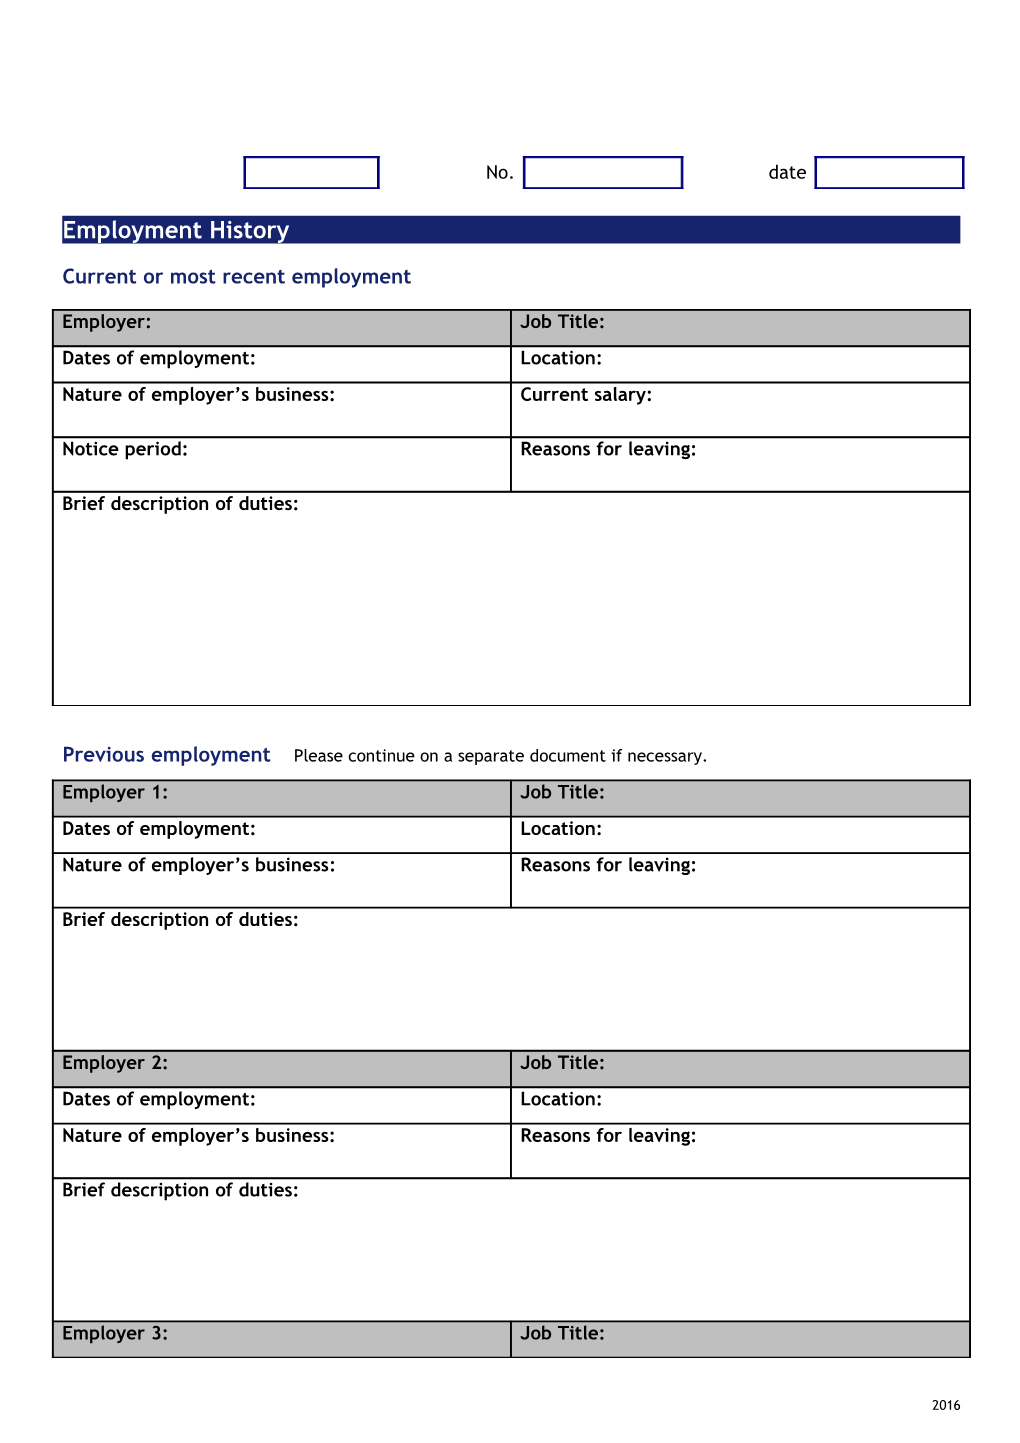 Application for Employment s193